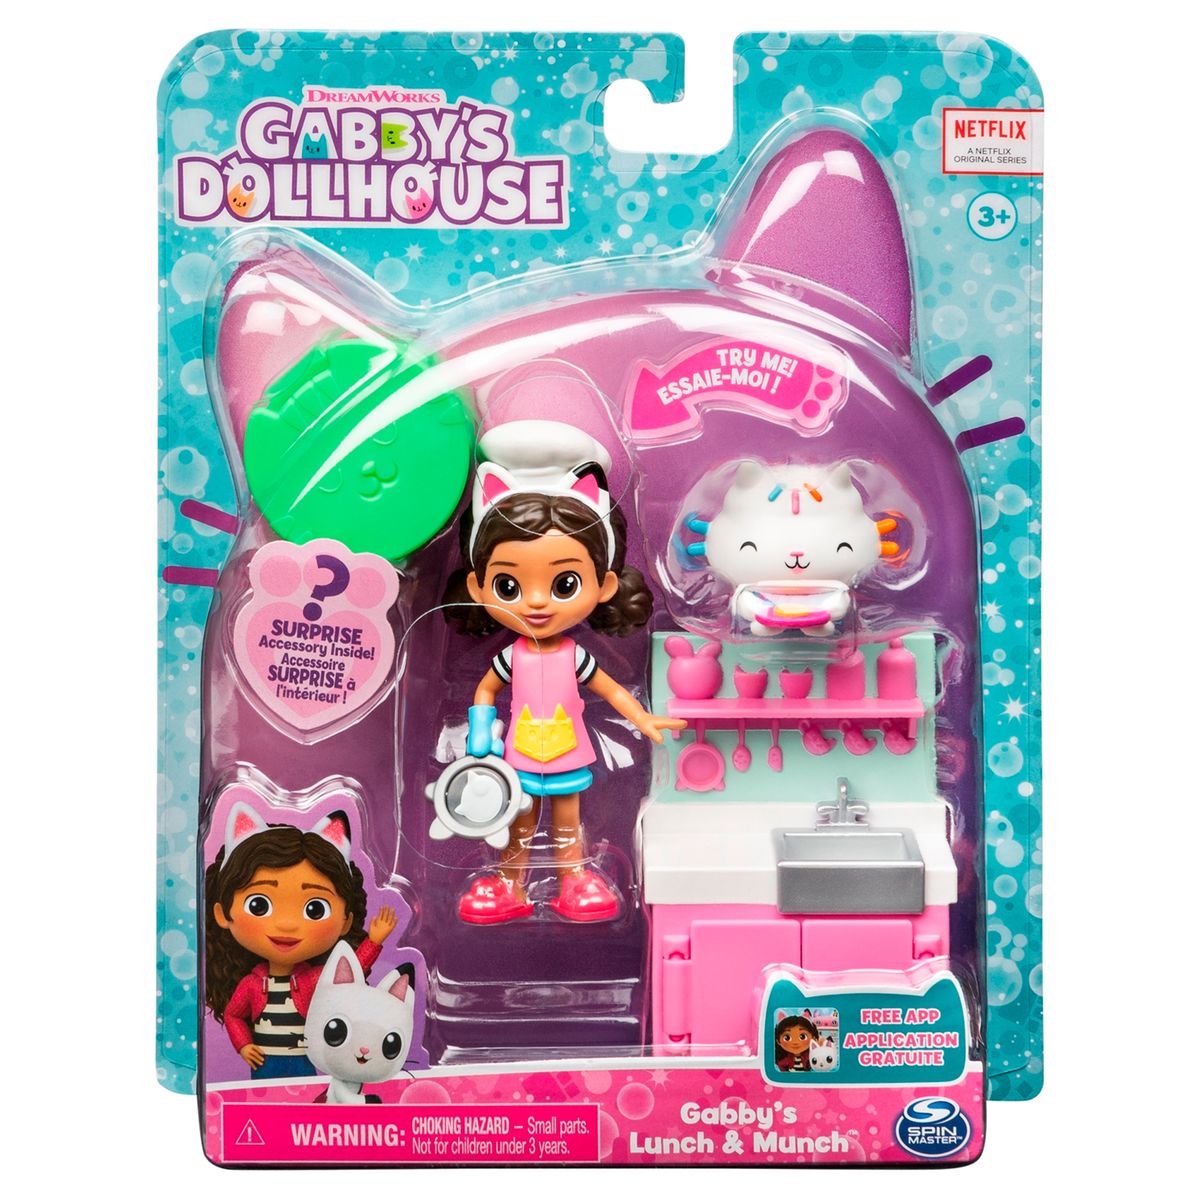 Gabby's dollhouse - set de cuisine lunch and munch multicolore Spin Master